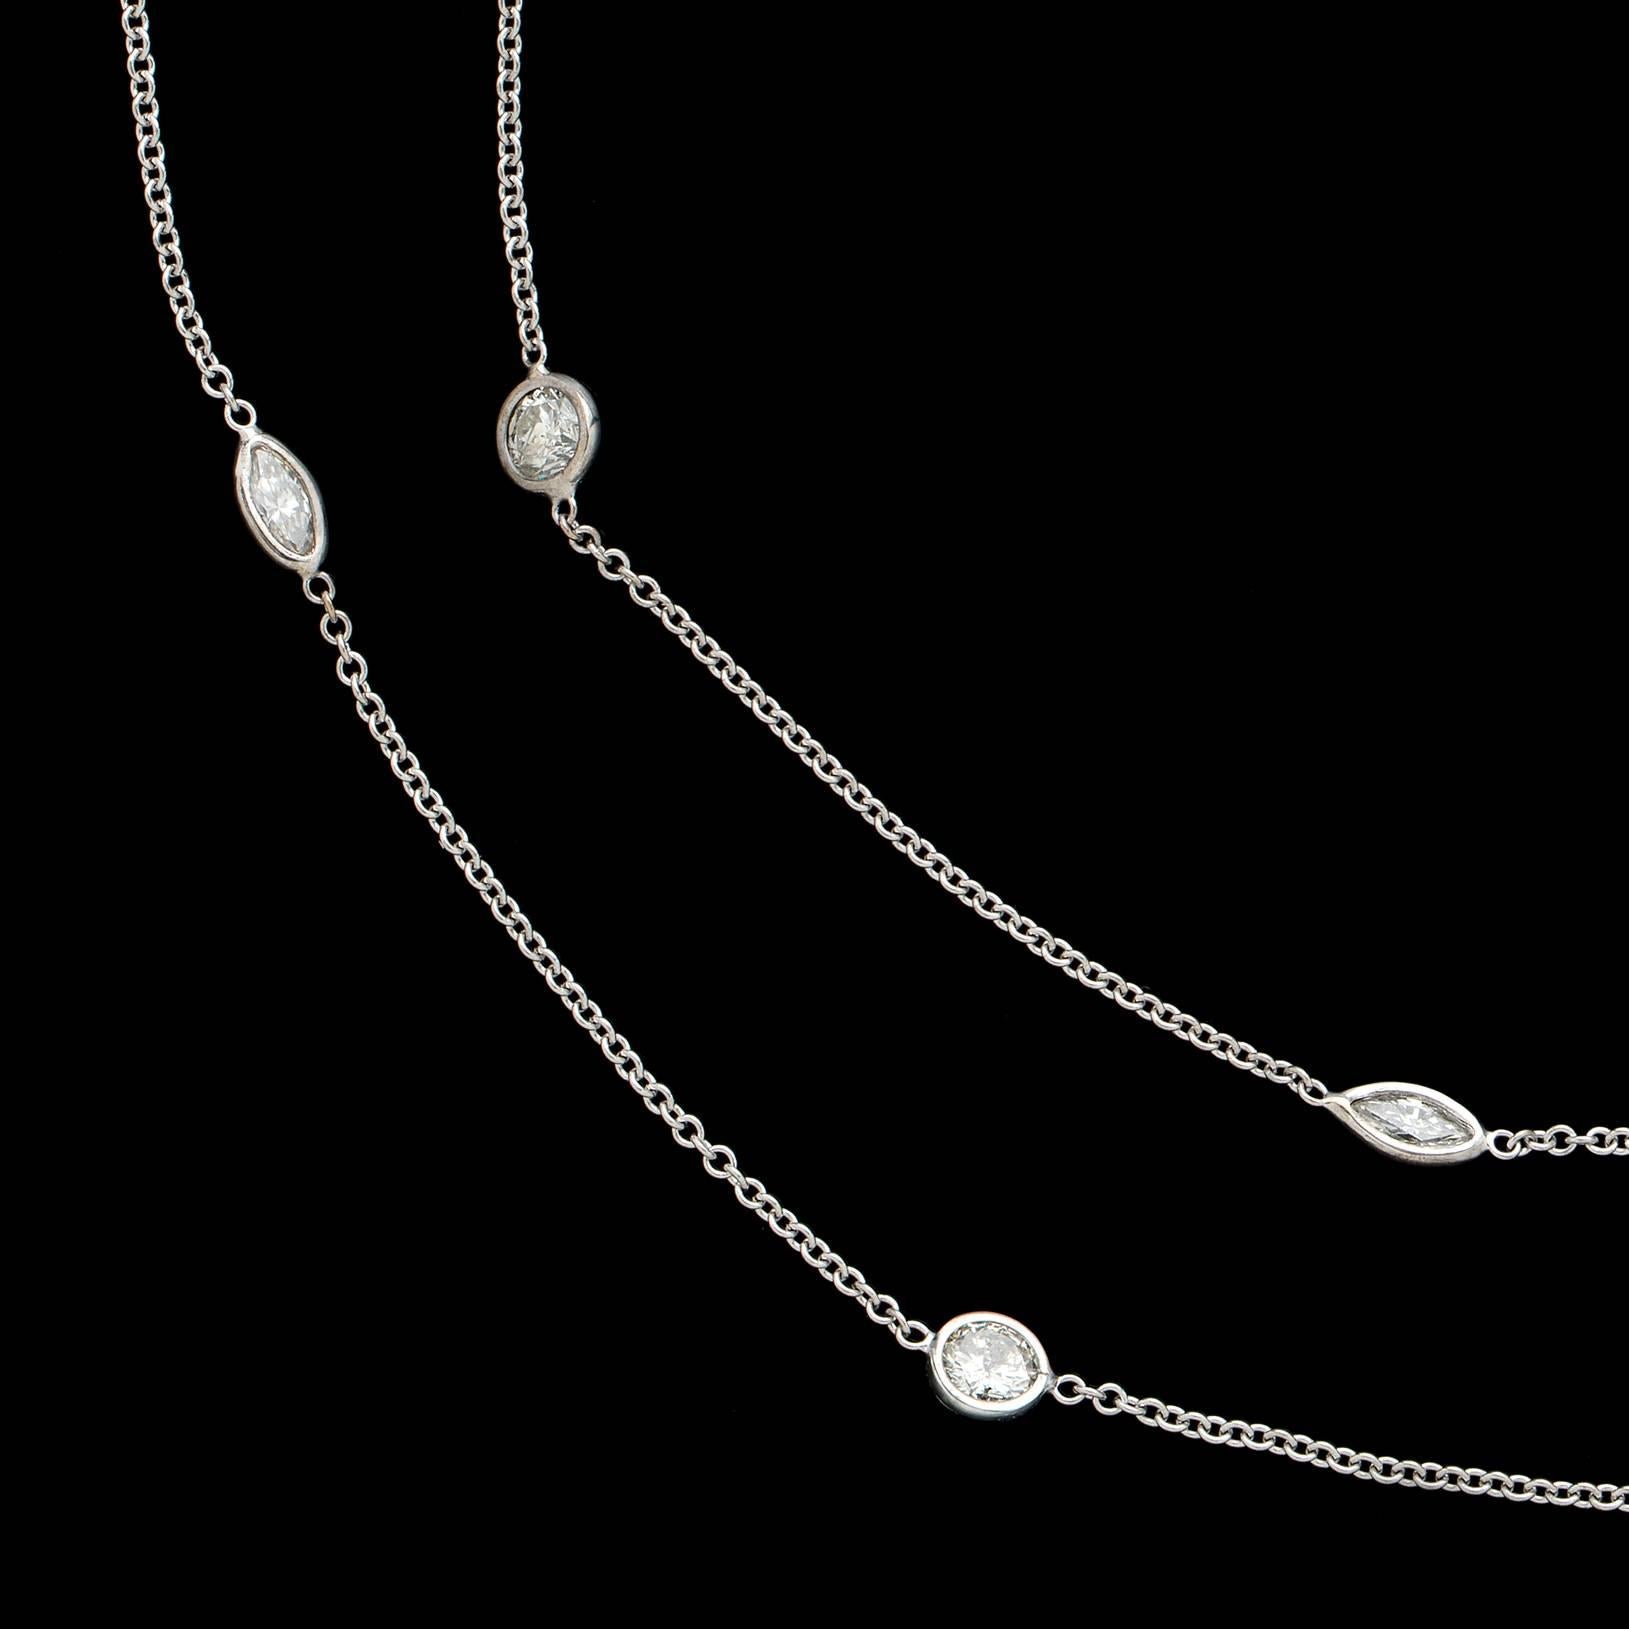 Modern Diamonds by The Yard Necklace Featuring Rounds and Marquises